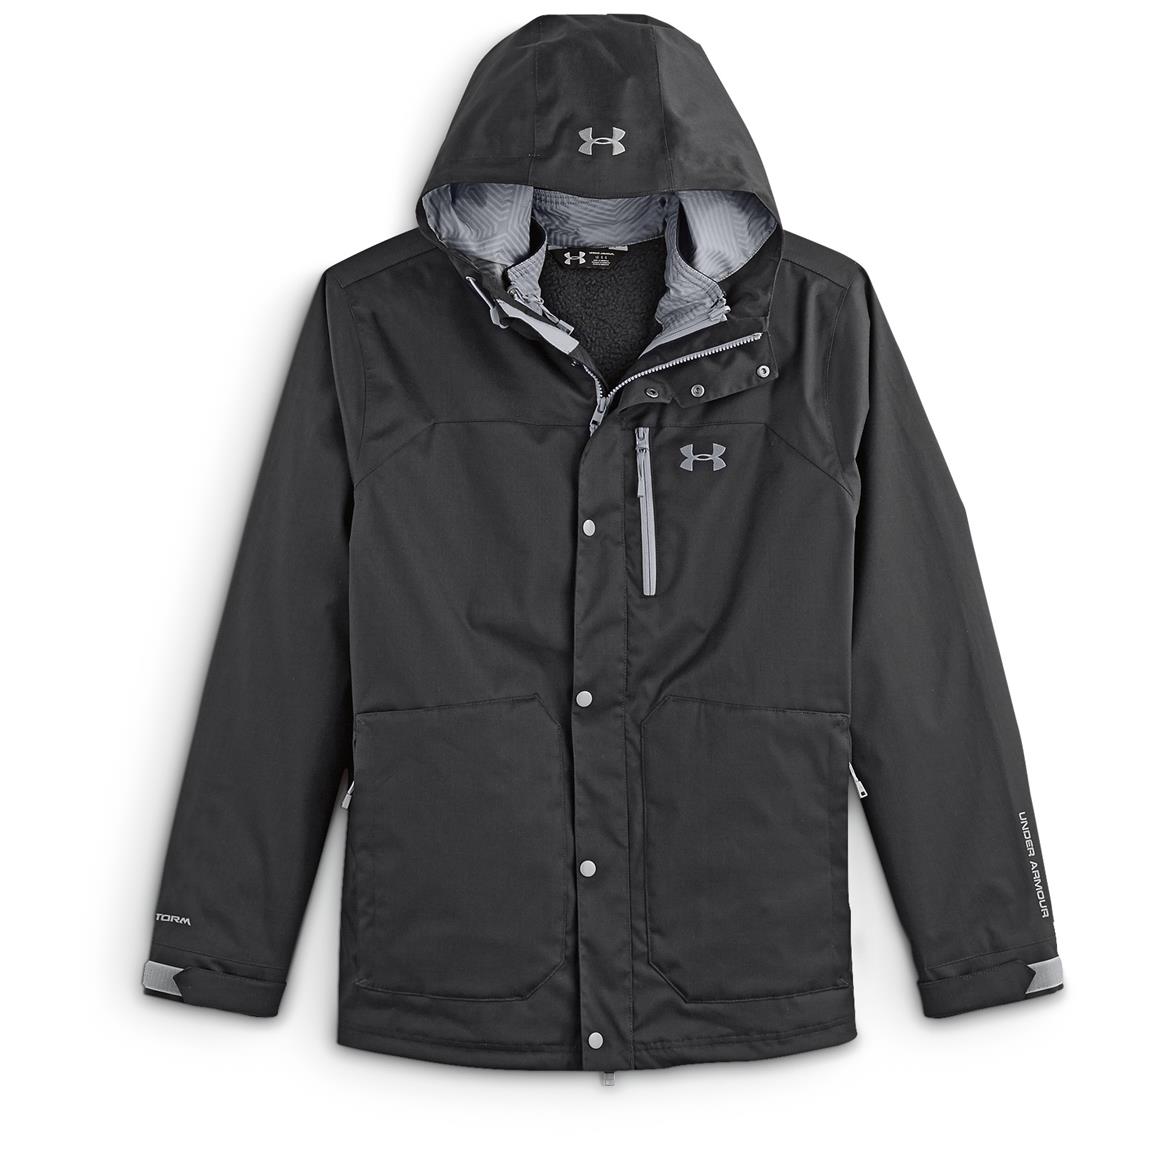 Cheap under armour windproof jacket Buy 